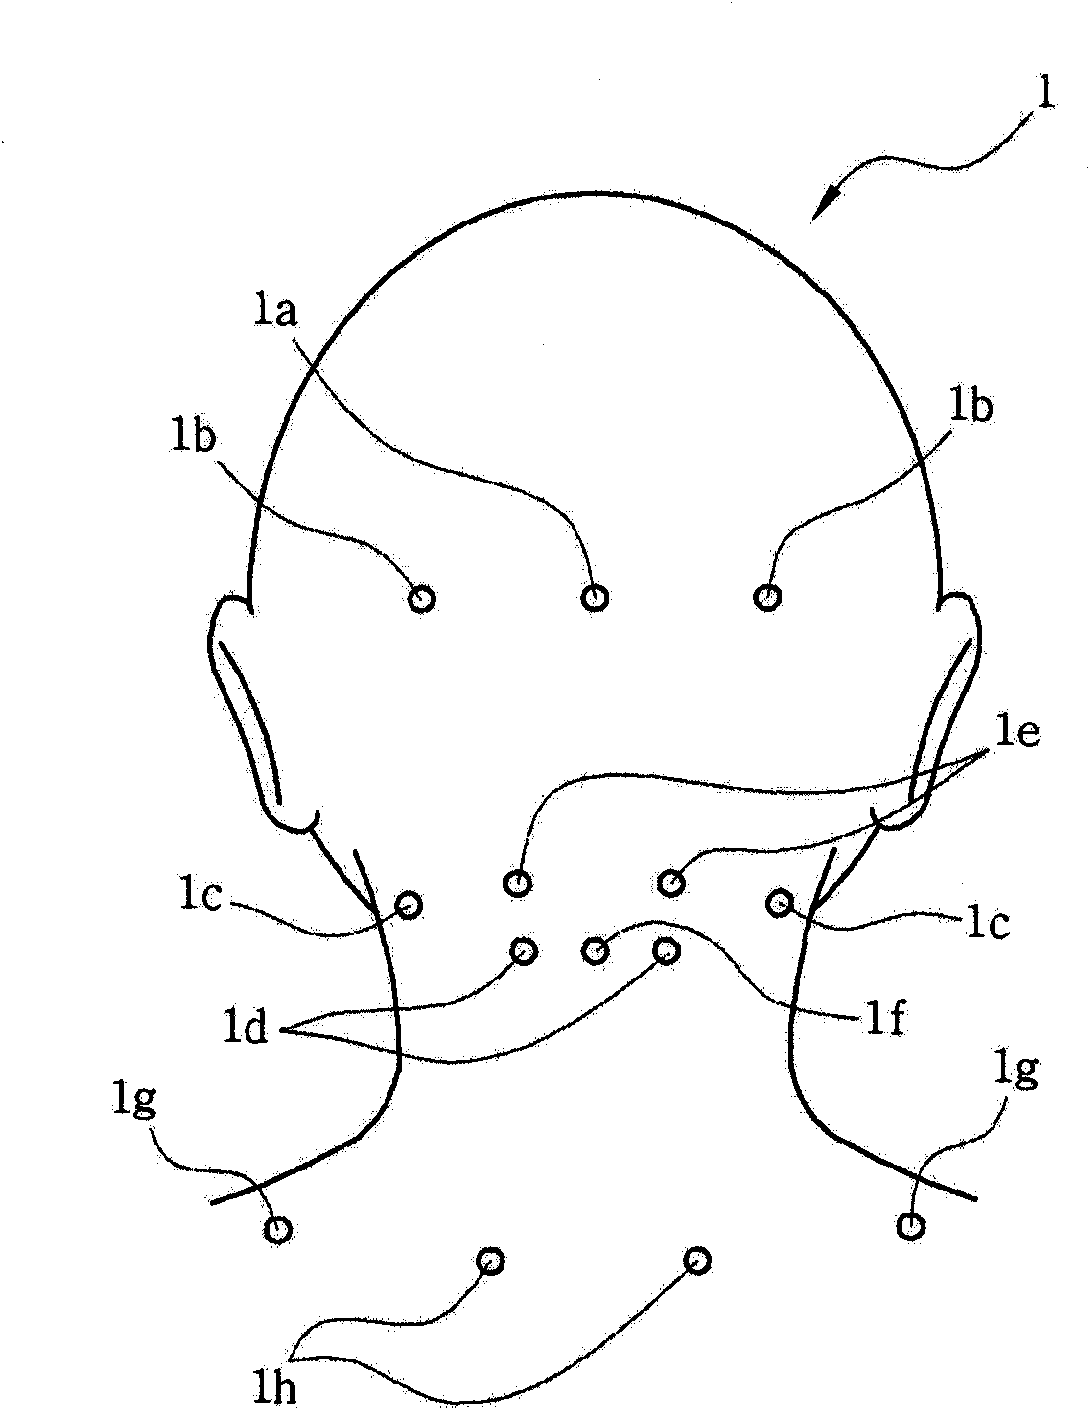 Pillow-type massage device for massaging acupuncture points of the body of a user